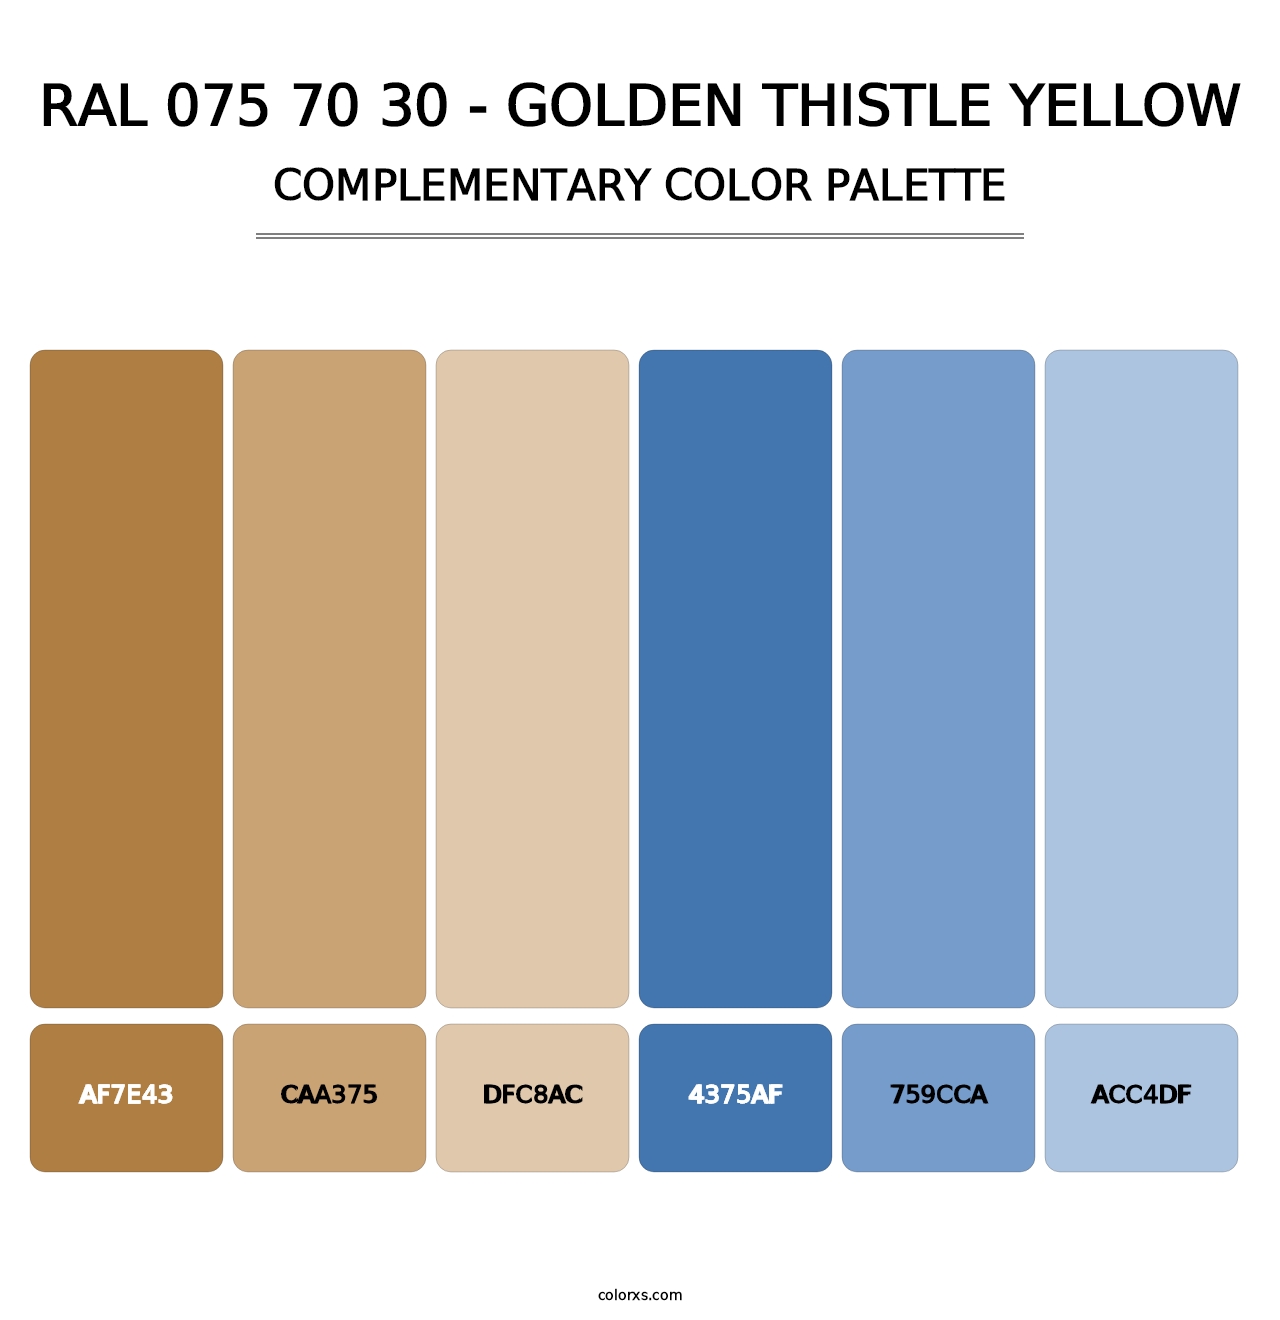 RAL 075 70 30 - Golden Thistle Yellow - Complementary Color Palette